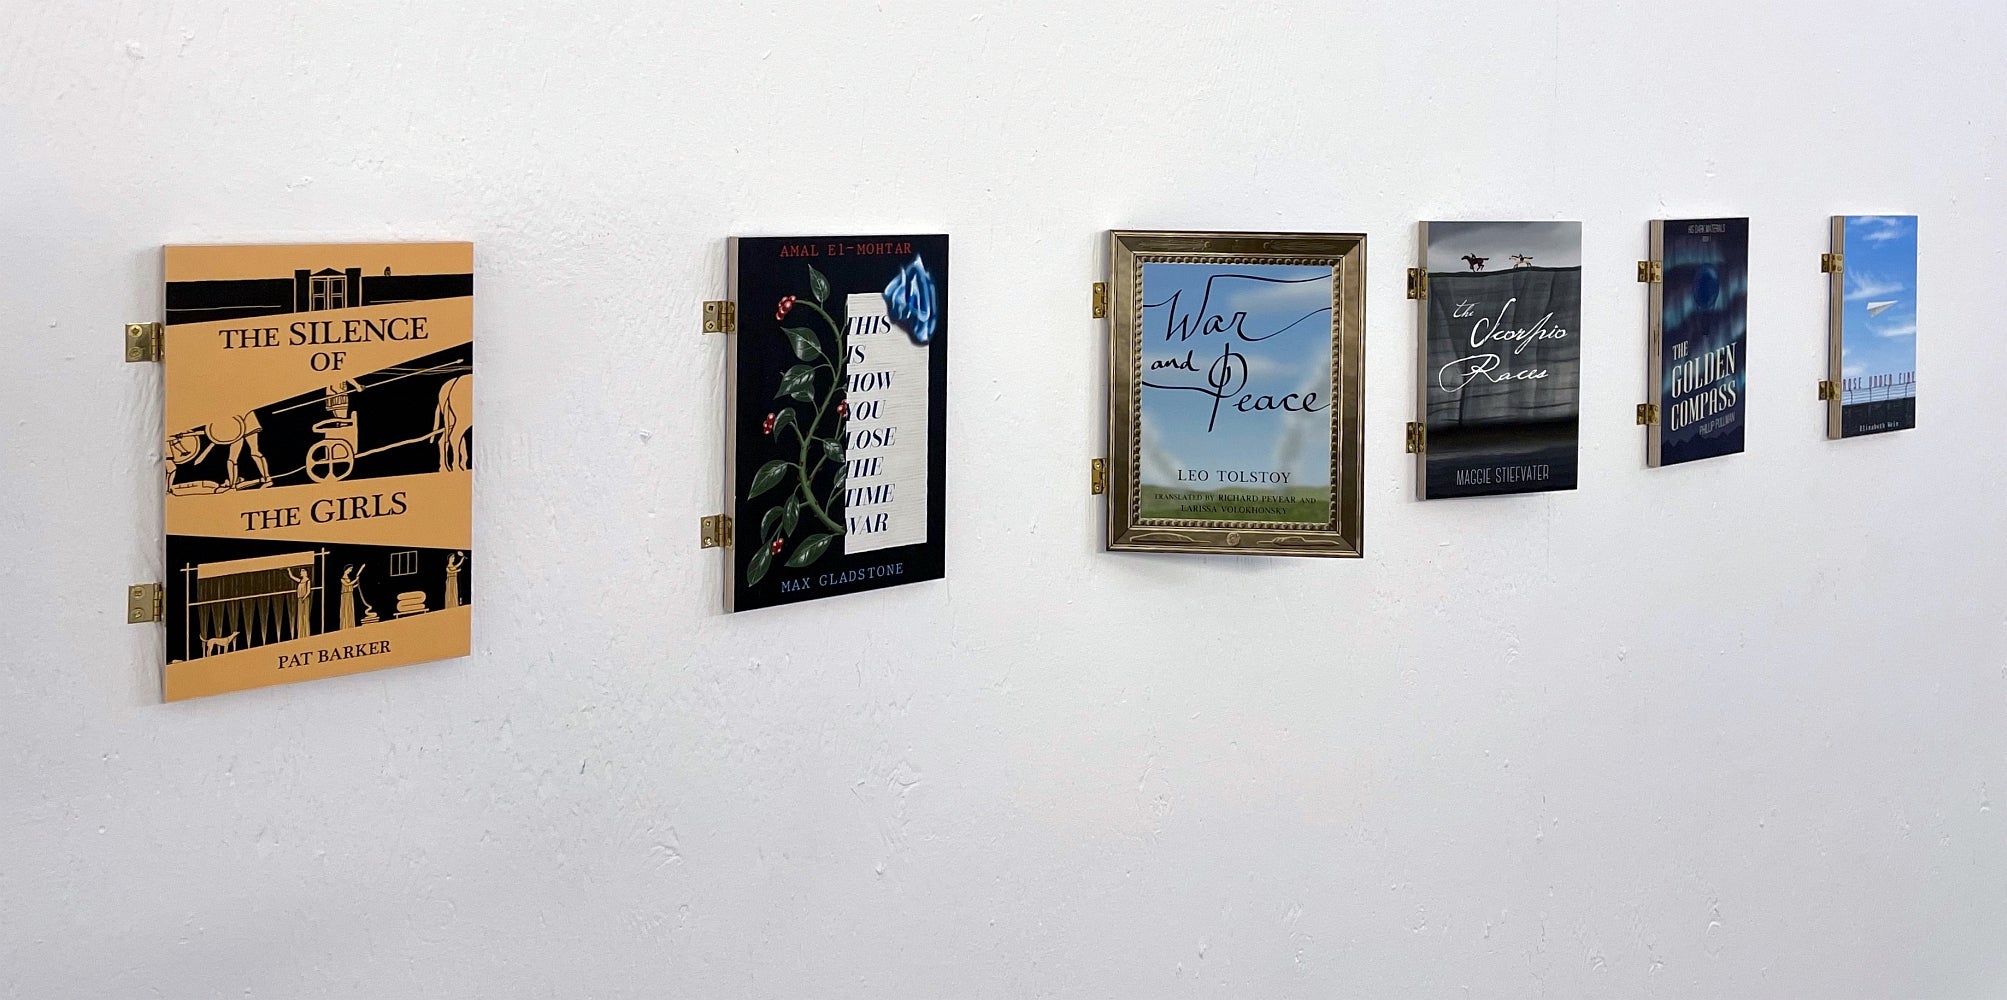 Art installation of 6 book covers attached to the wall with hinges, one is positioned slightly open, away from the wall.